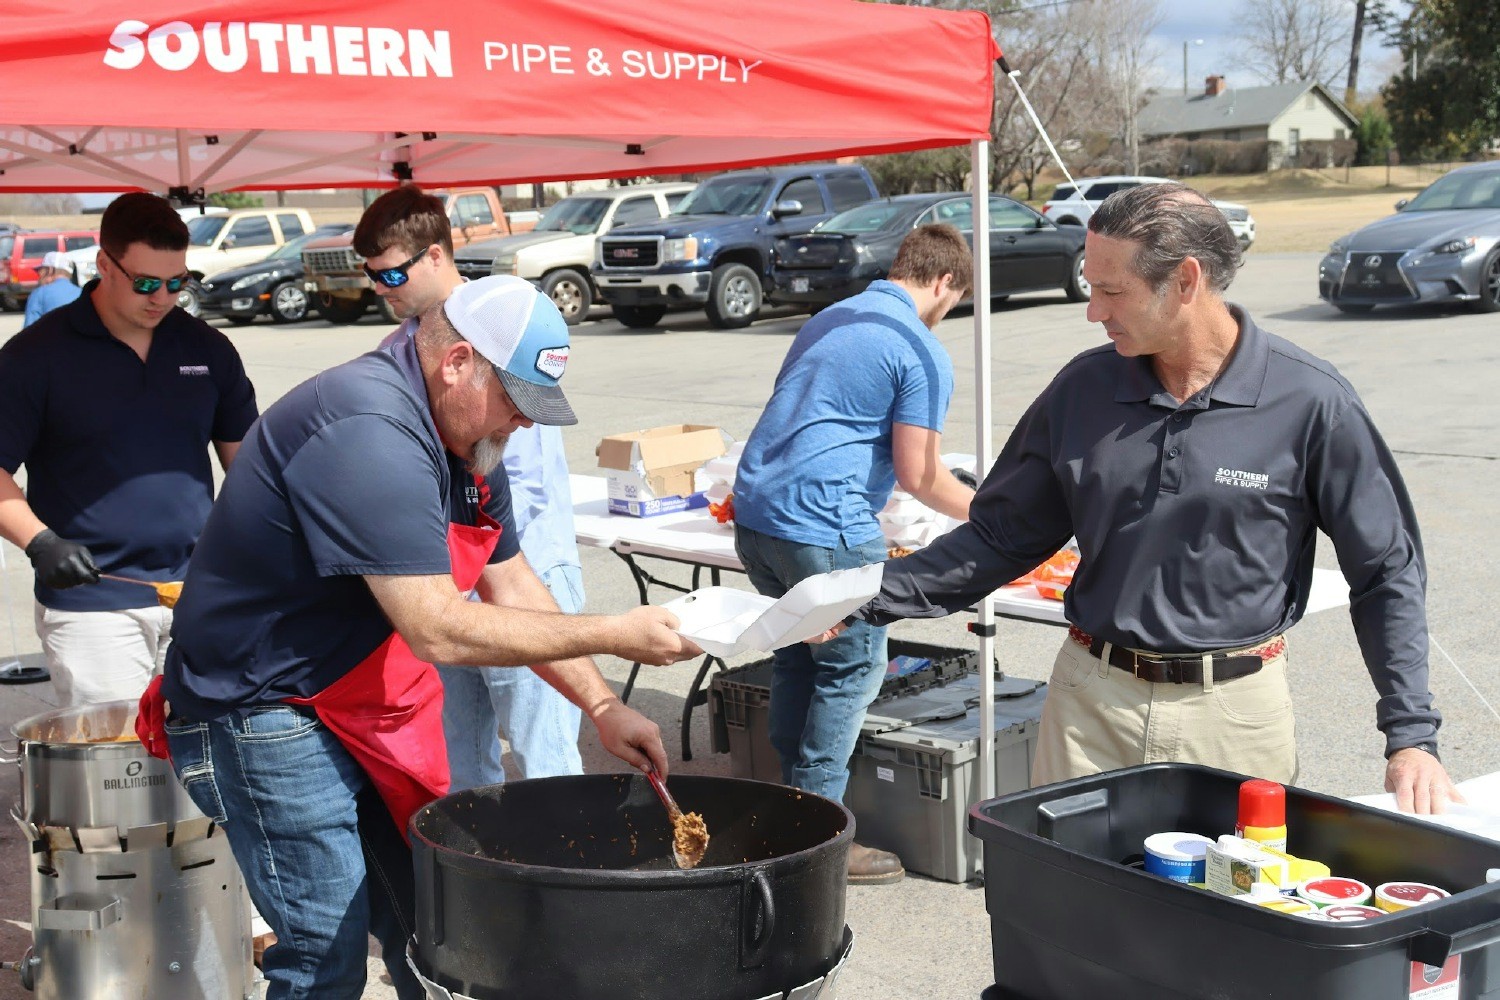 Jay Davidson (CEO) serving lunch at Distribution Center Cookout